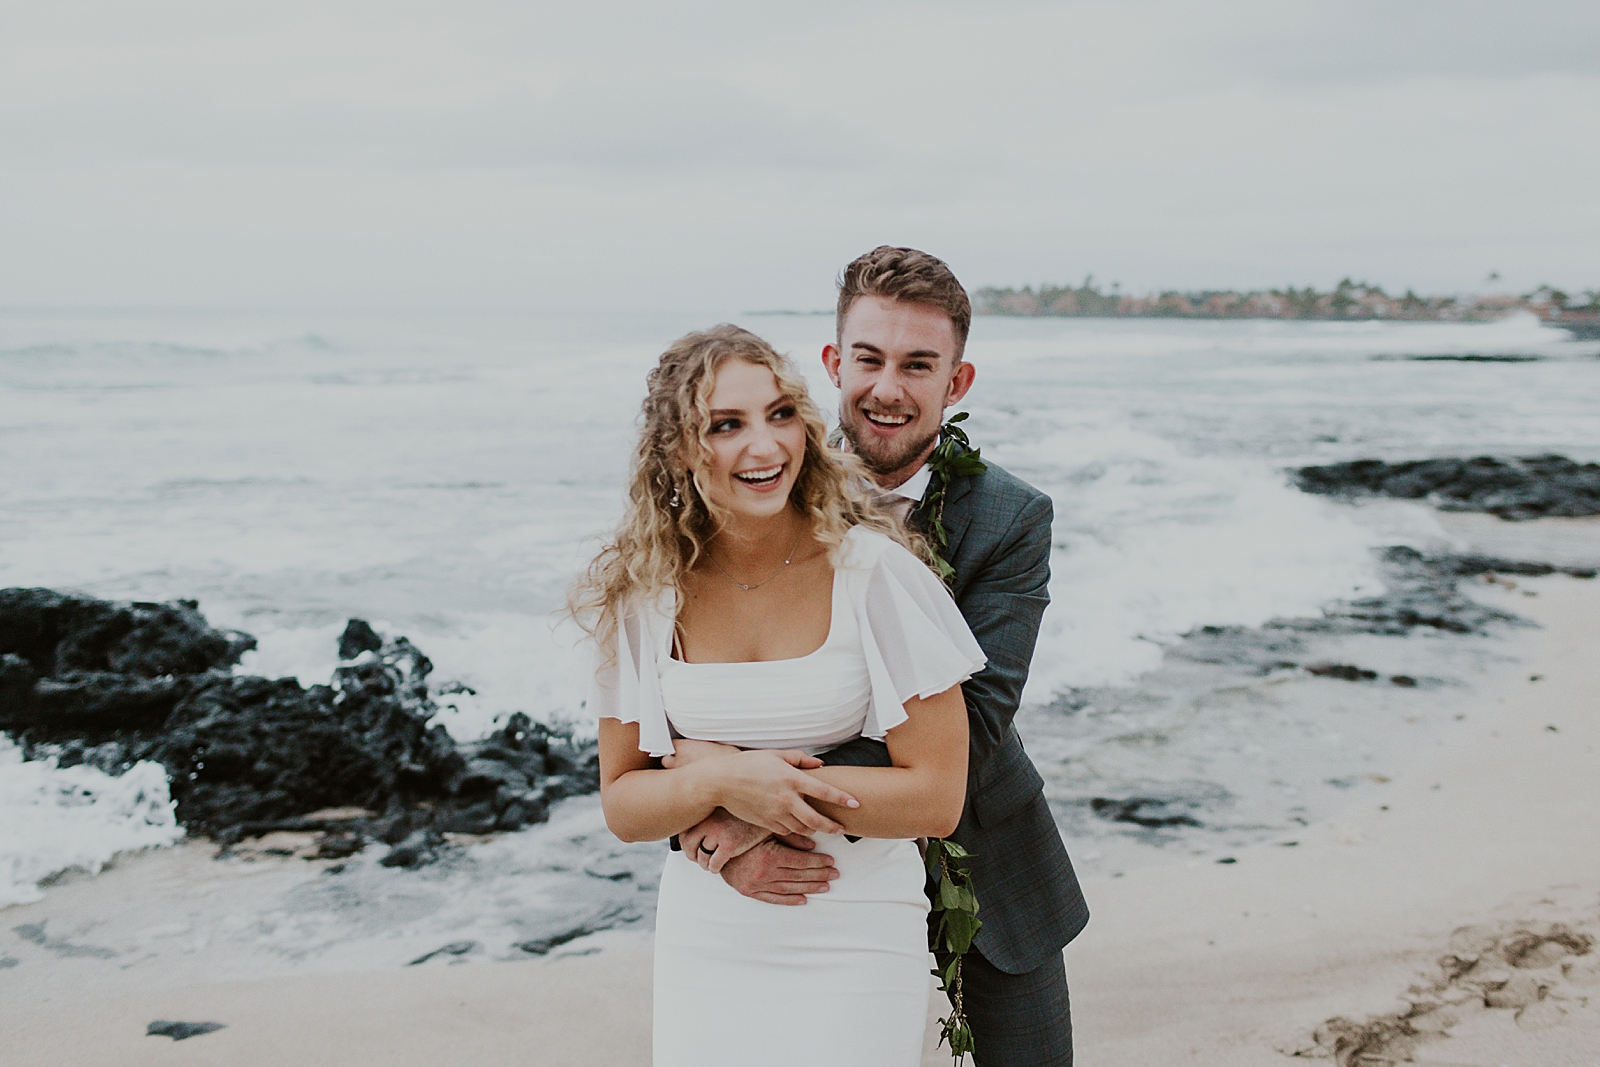 Groom holding Bride by the Oceanside with rocks